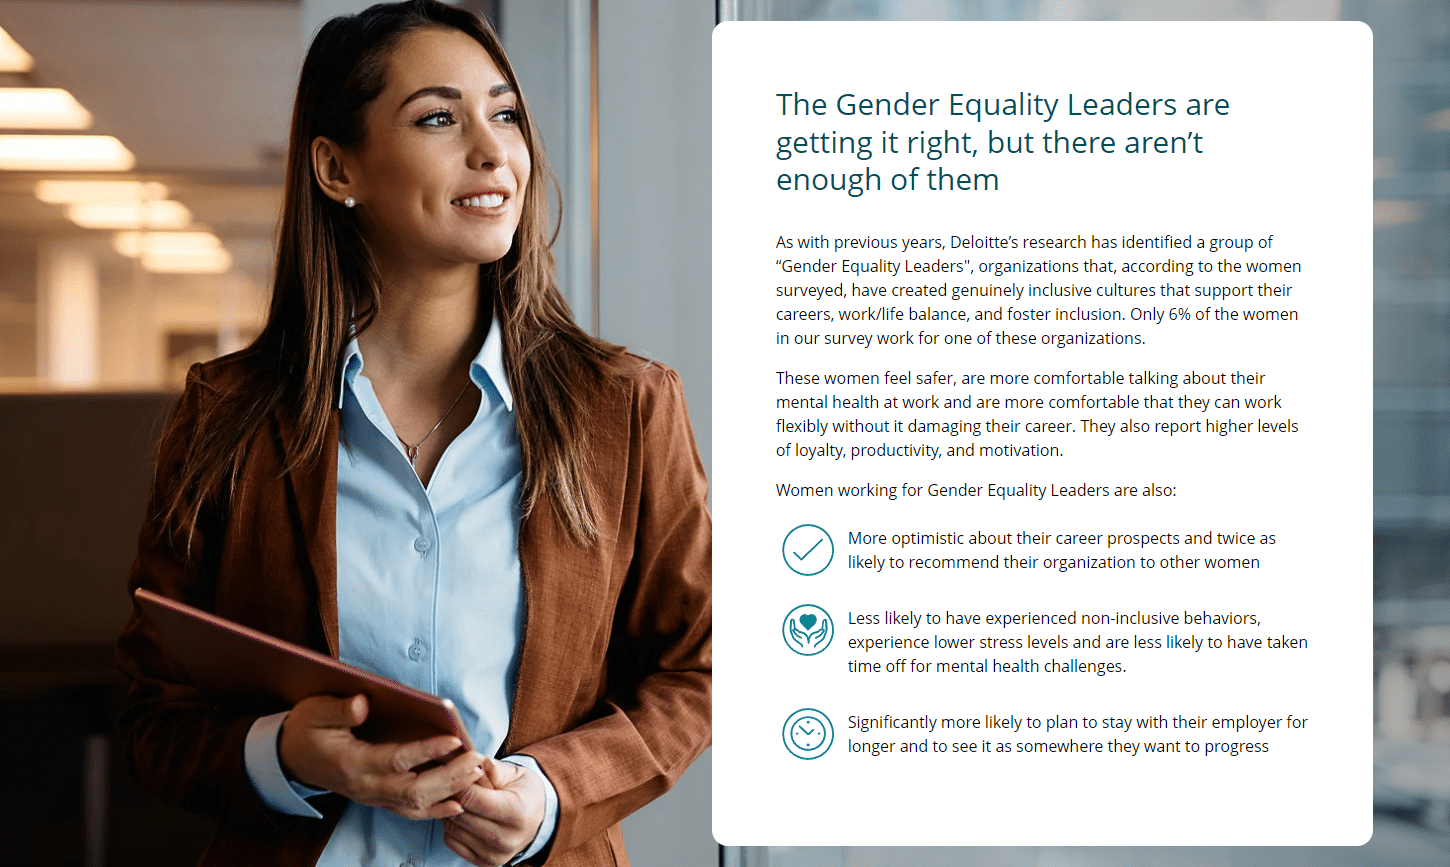 Women At Gender Equality Leading Firms Show 3x Higher Loyalty & Productivity: Deloitte Survey